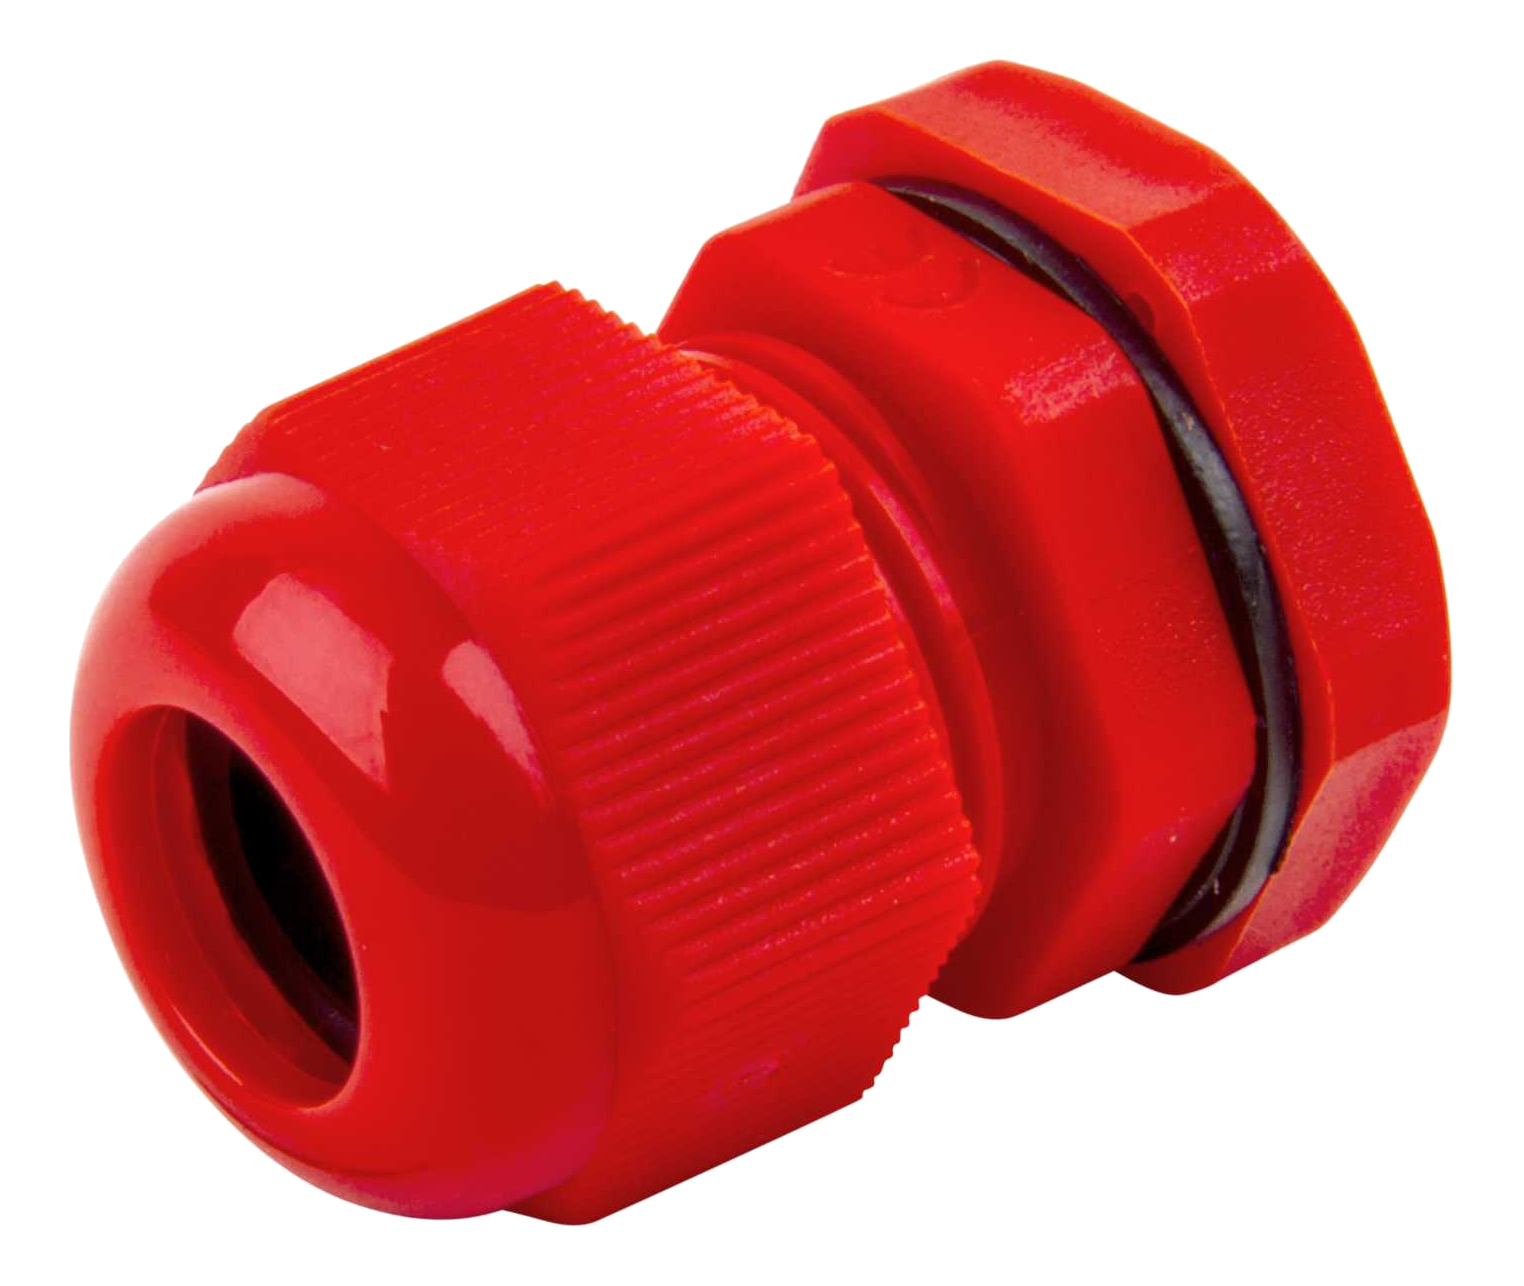 Termtech Compression Cable Gland 20mm Red 